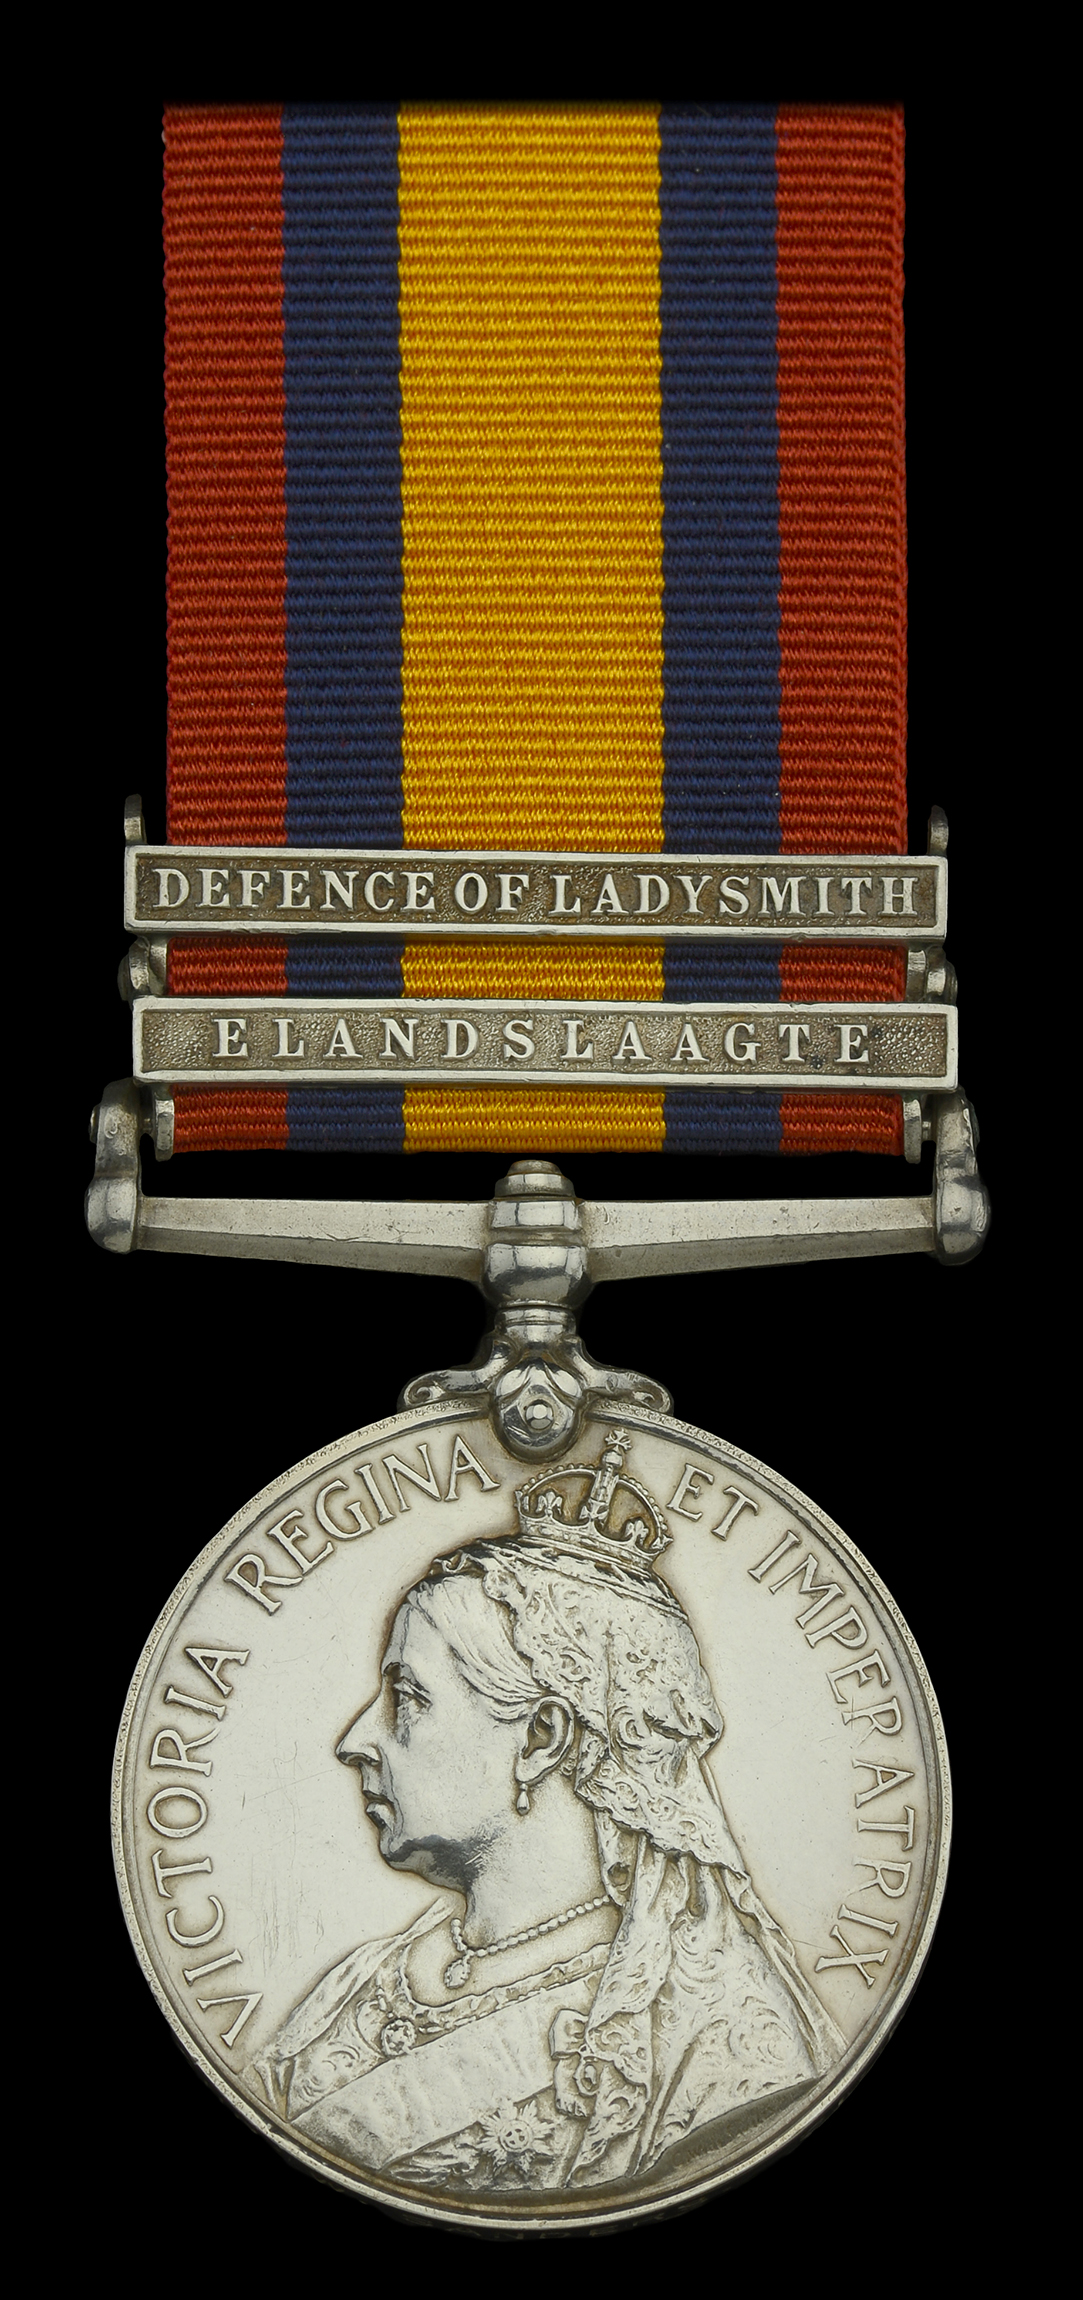 Queen's South Africa 1899-1902, 2 clasps, Elandslaagte, Defence of Ladysmith (13400 Gnr: W....